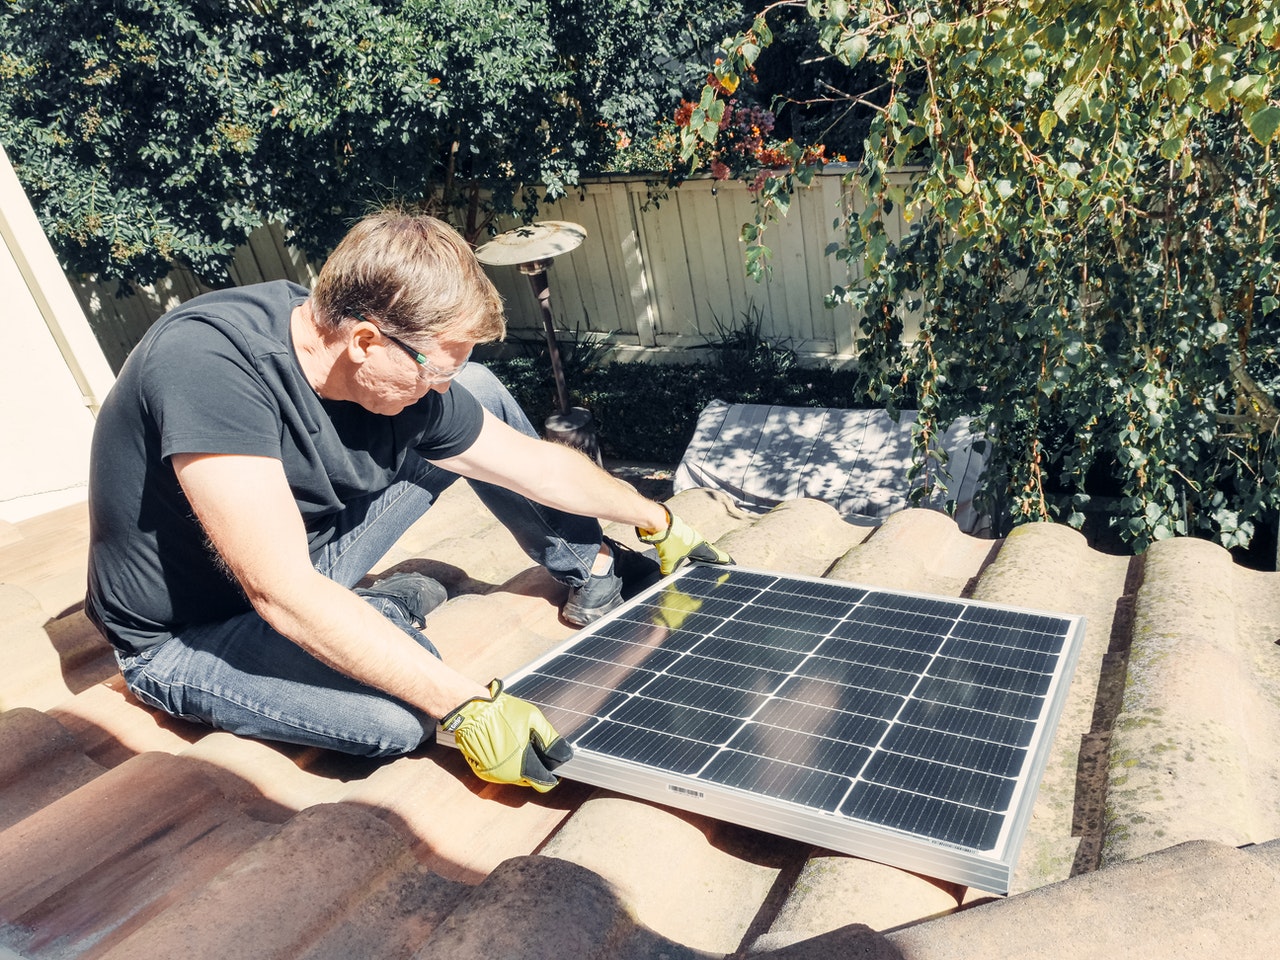 A man installing a sustainable solar panel on a property roof.